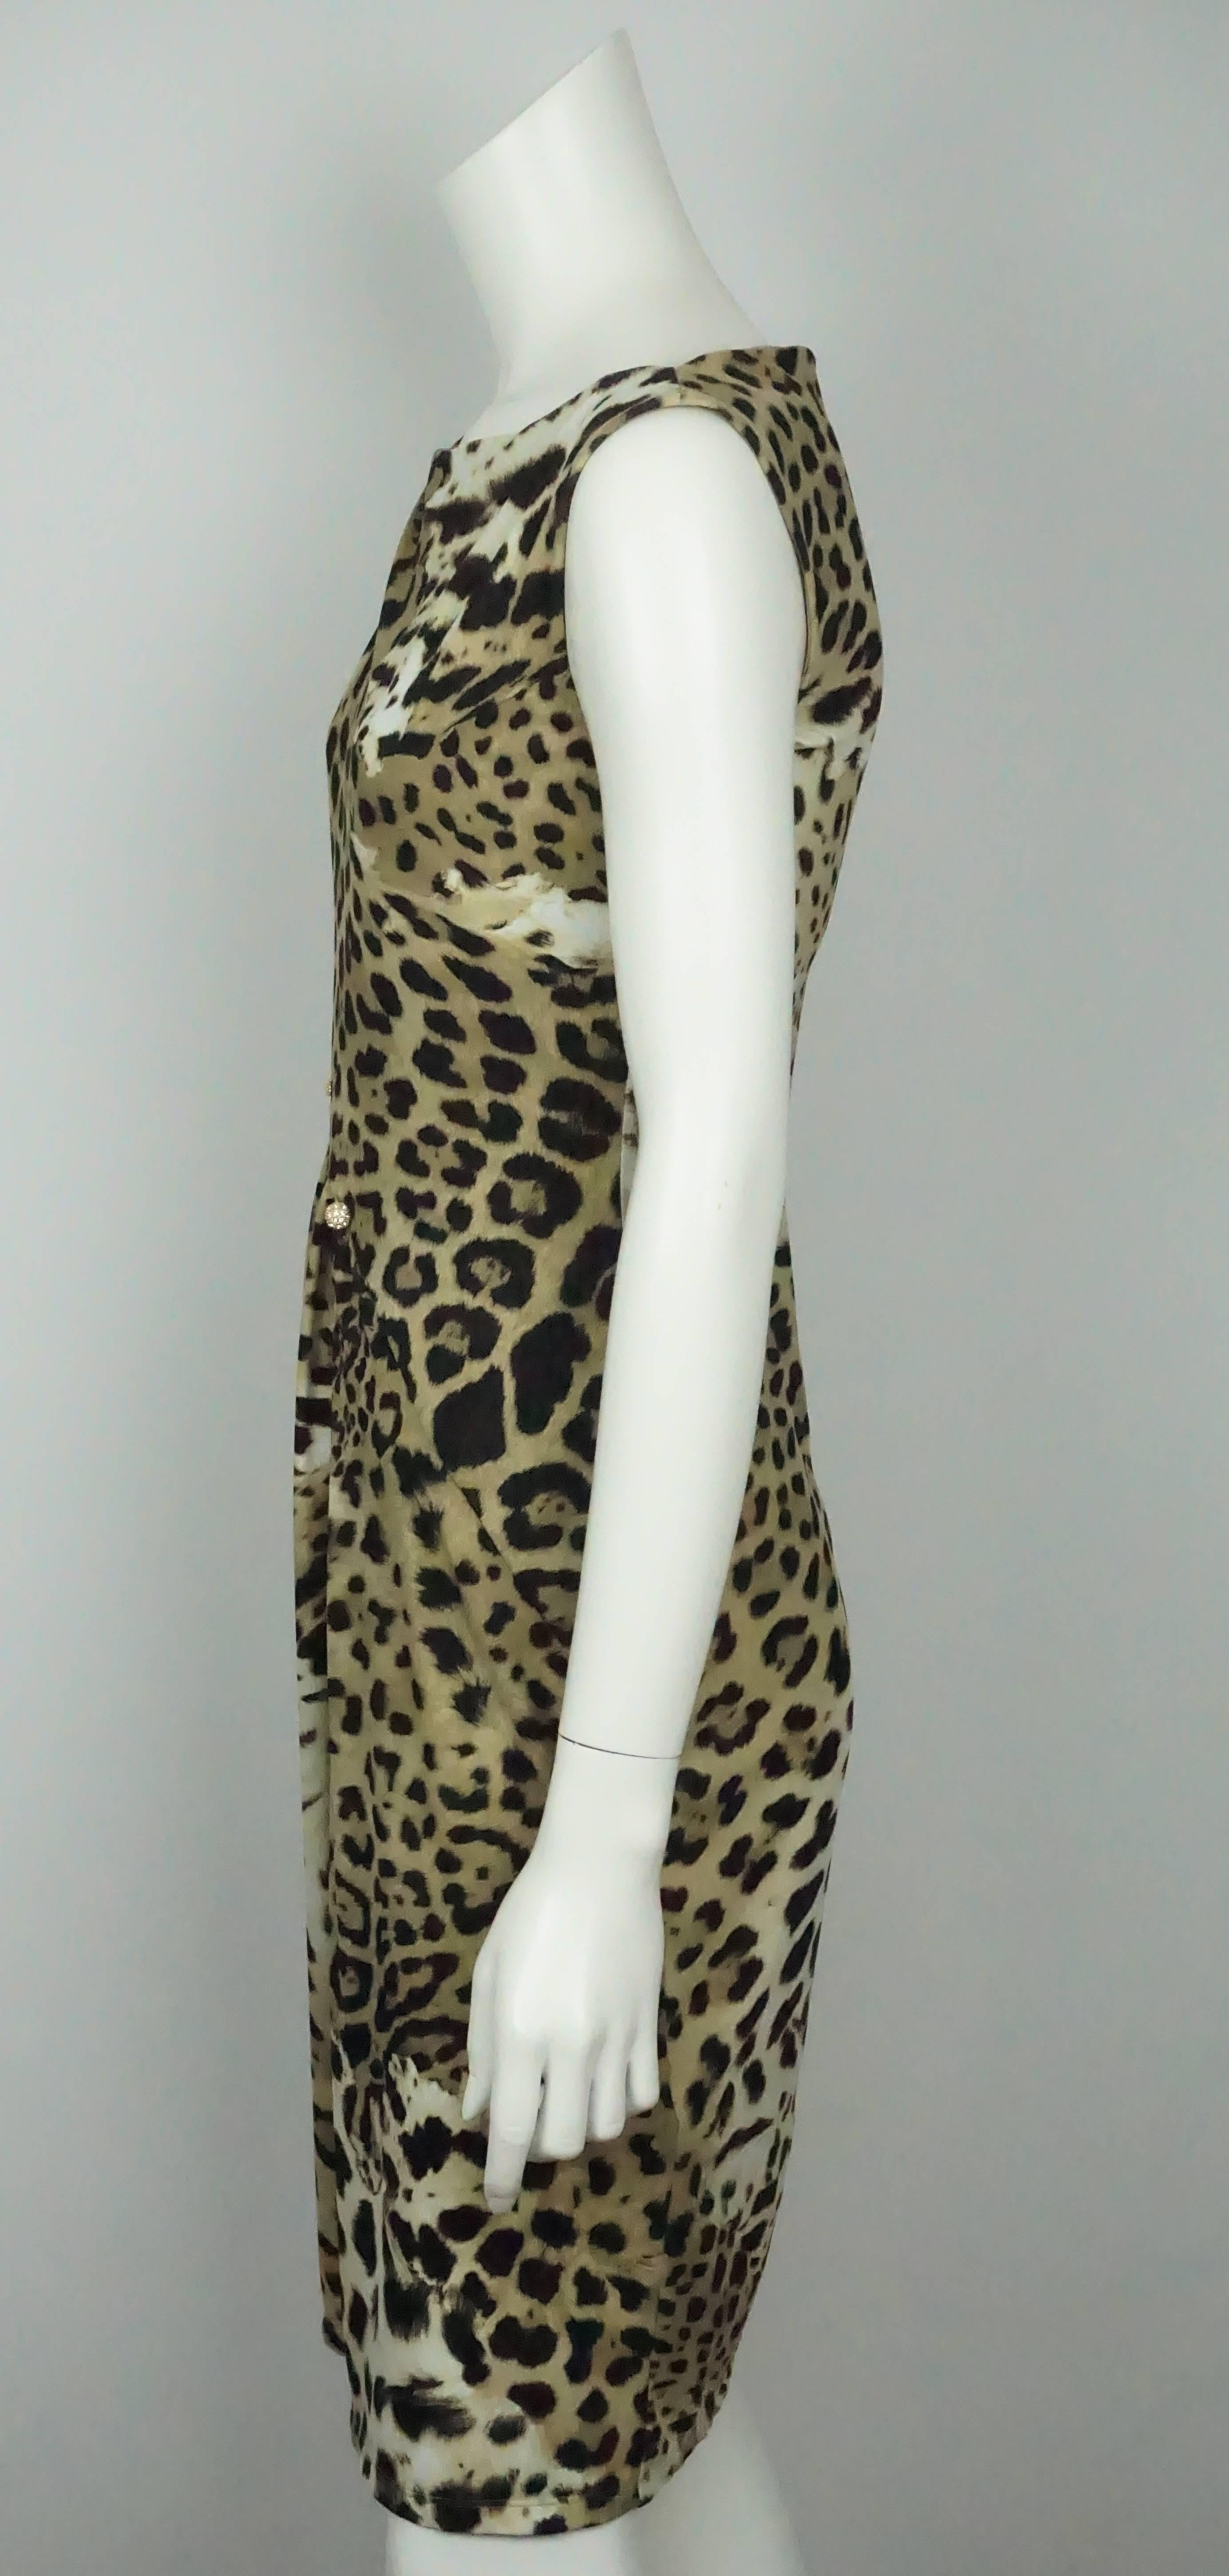 Roberto Cavalli Earthtone Animal Print Jersey Sleeveless Dress - 42  This leopard print sleeveless dress is made of jersey and has two pleats on the right shoulder. It has an asymetrical cut along the front of the dress with an inverted pleat at the